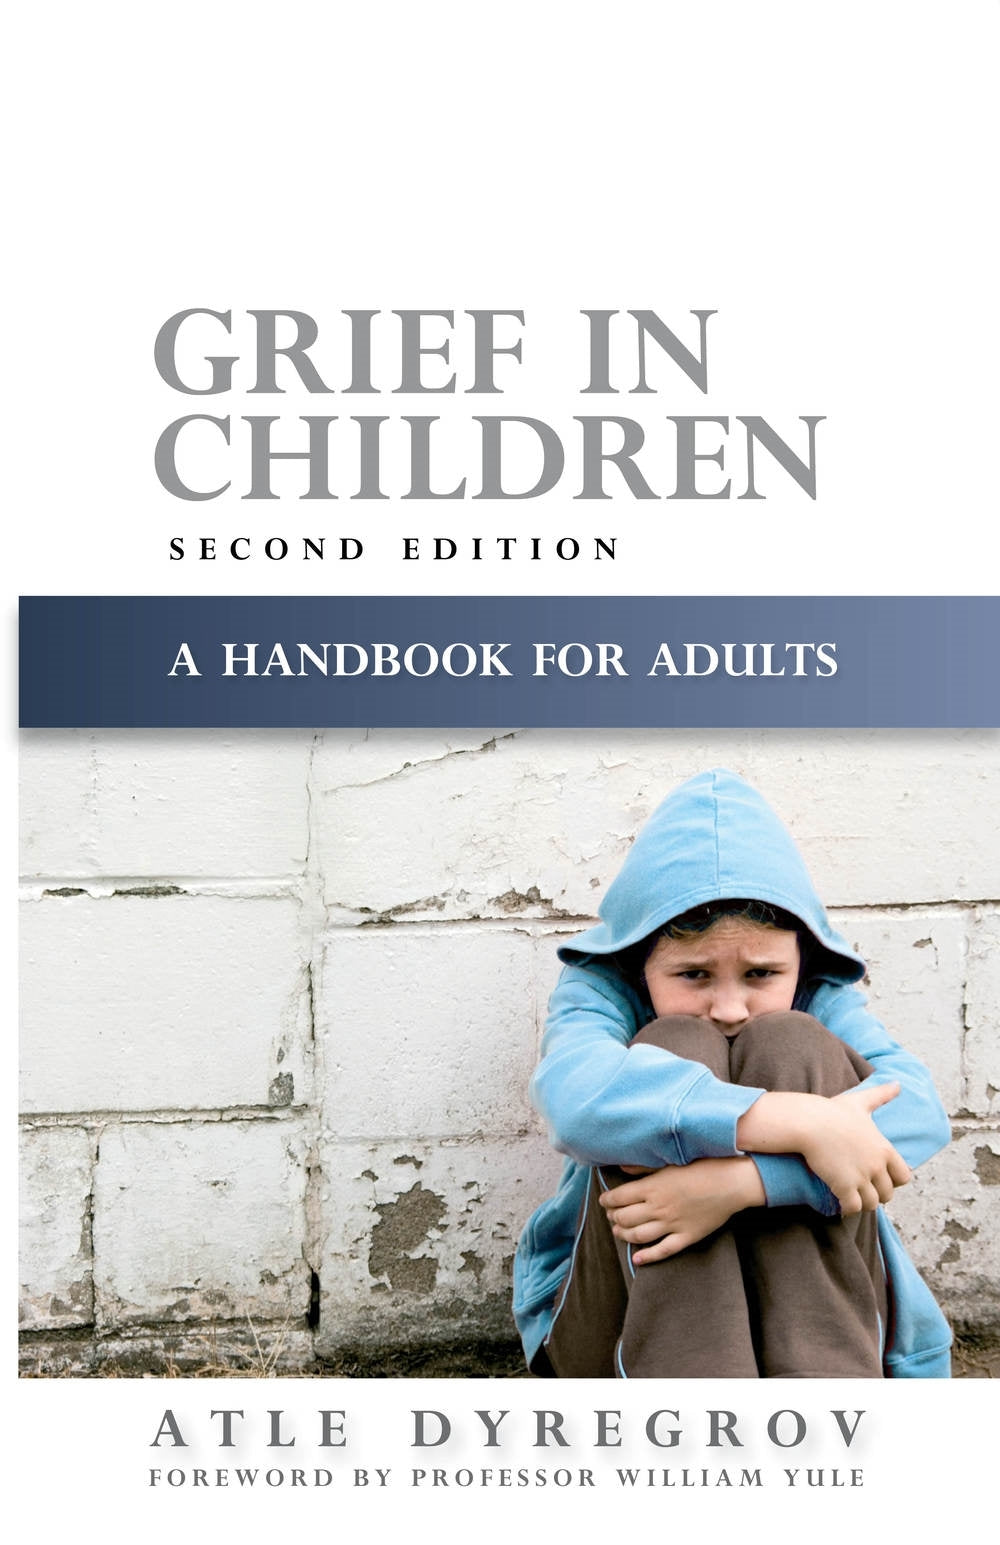 Grief in Children by William Yule, No Author Listed, Atle Dyregrov